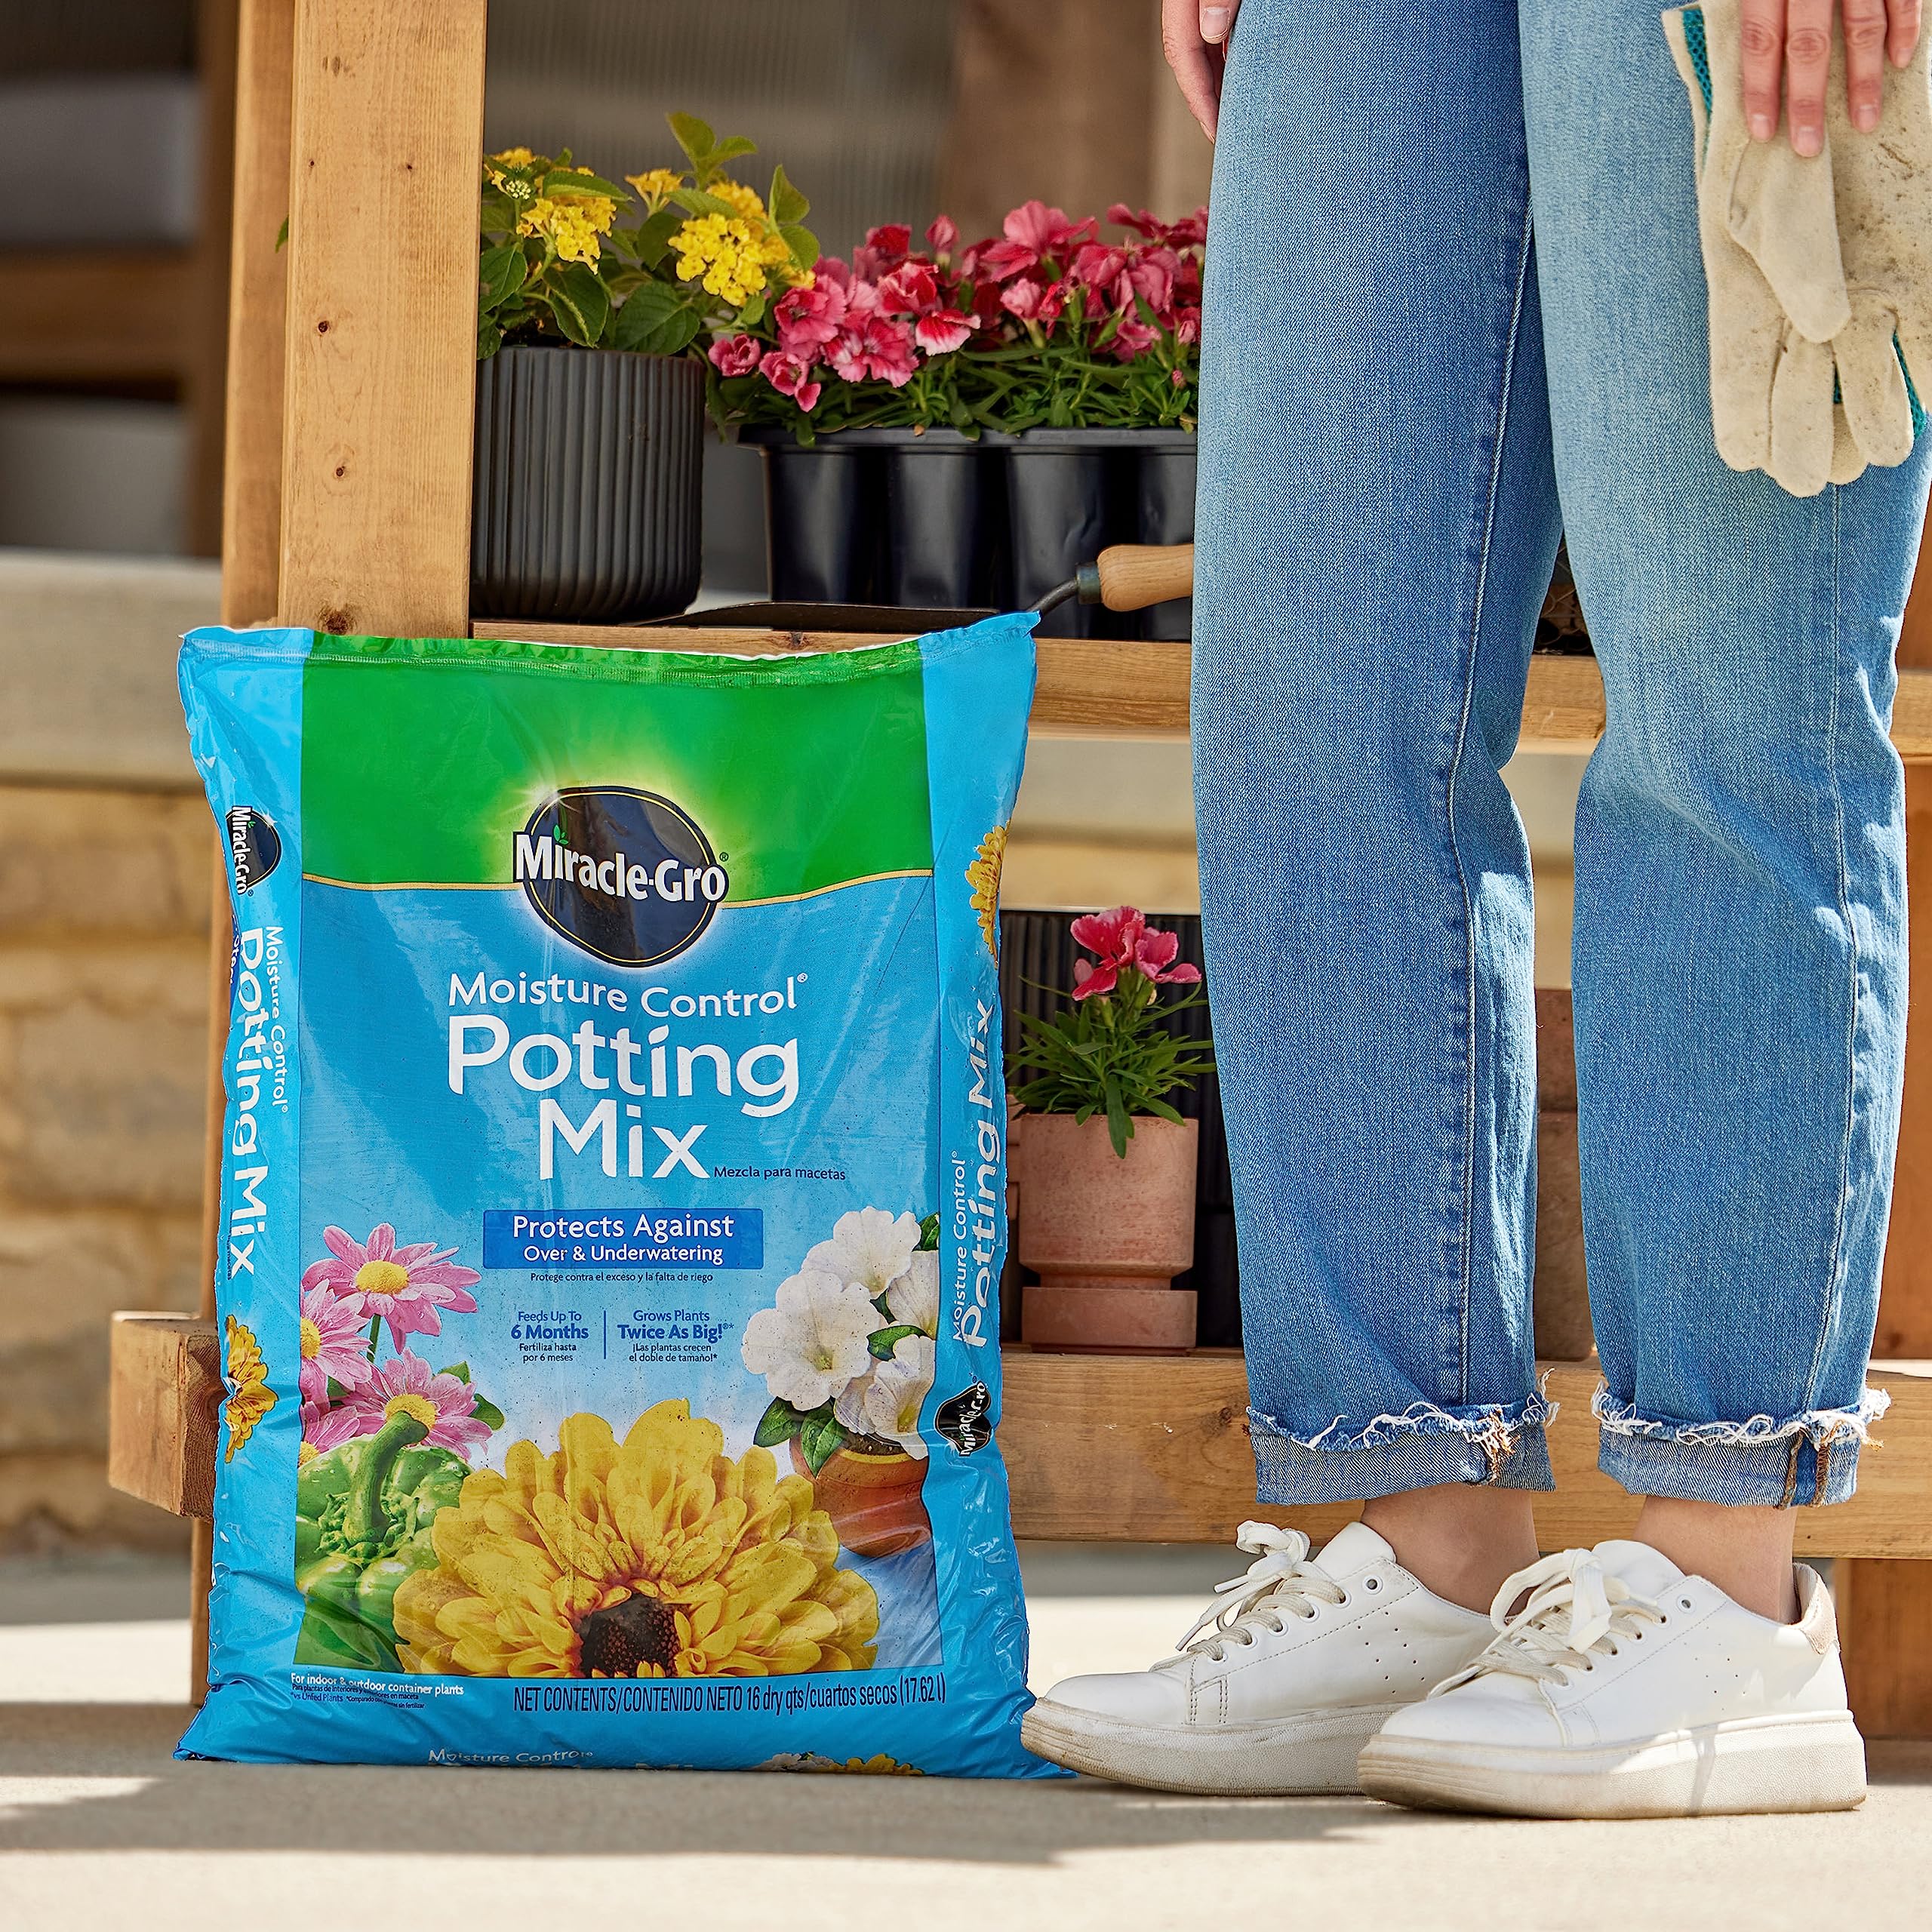 DIY Potting Soil for less than half the price of store bought.